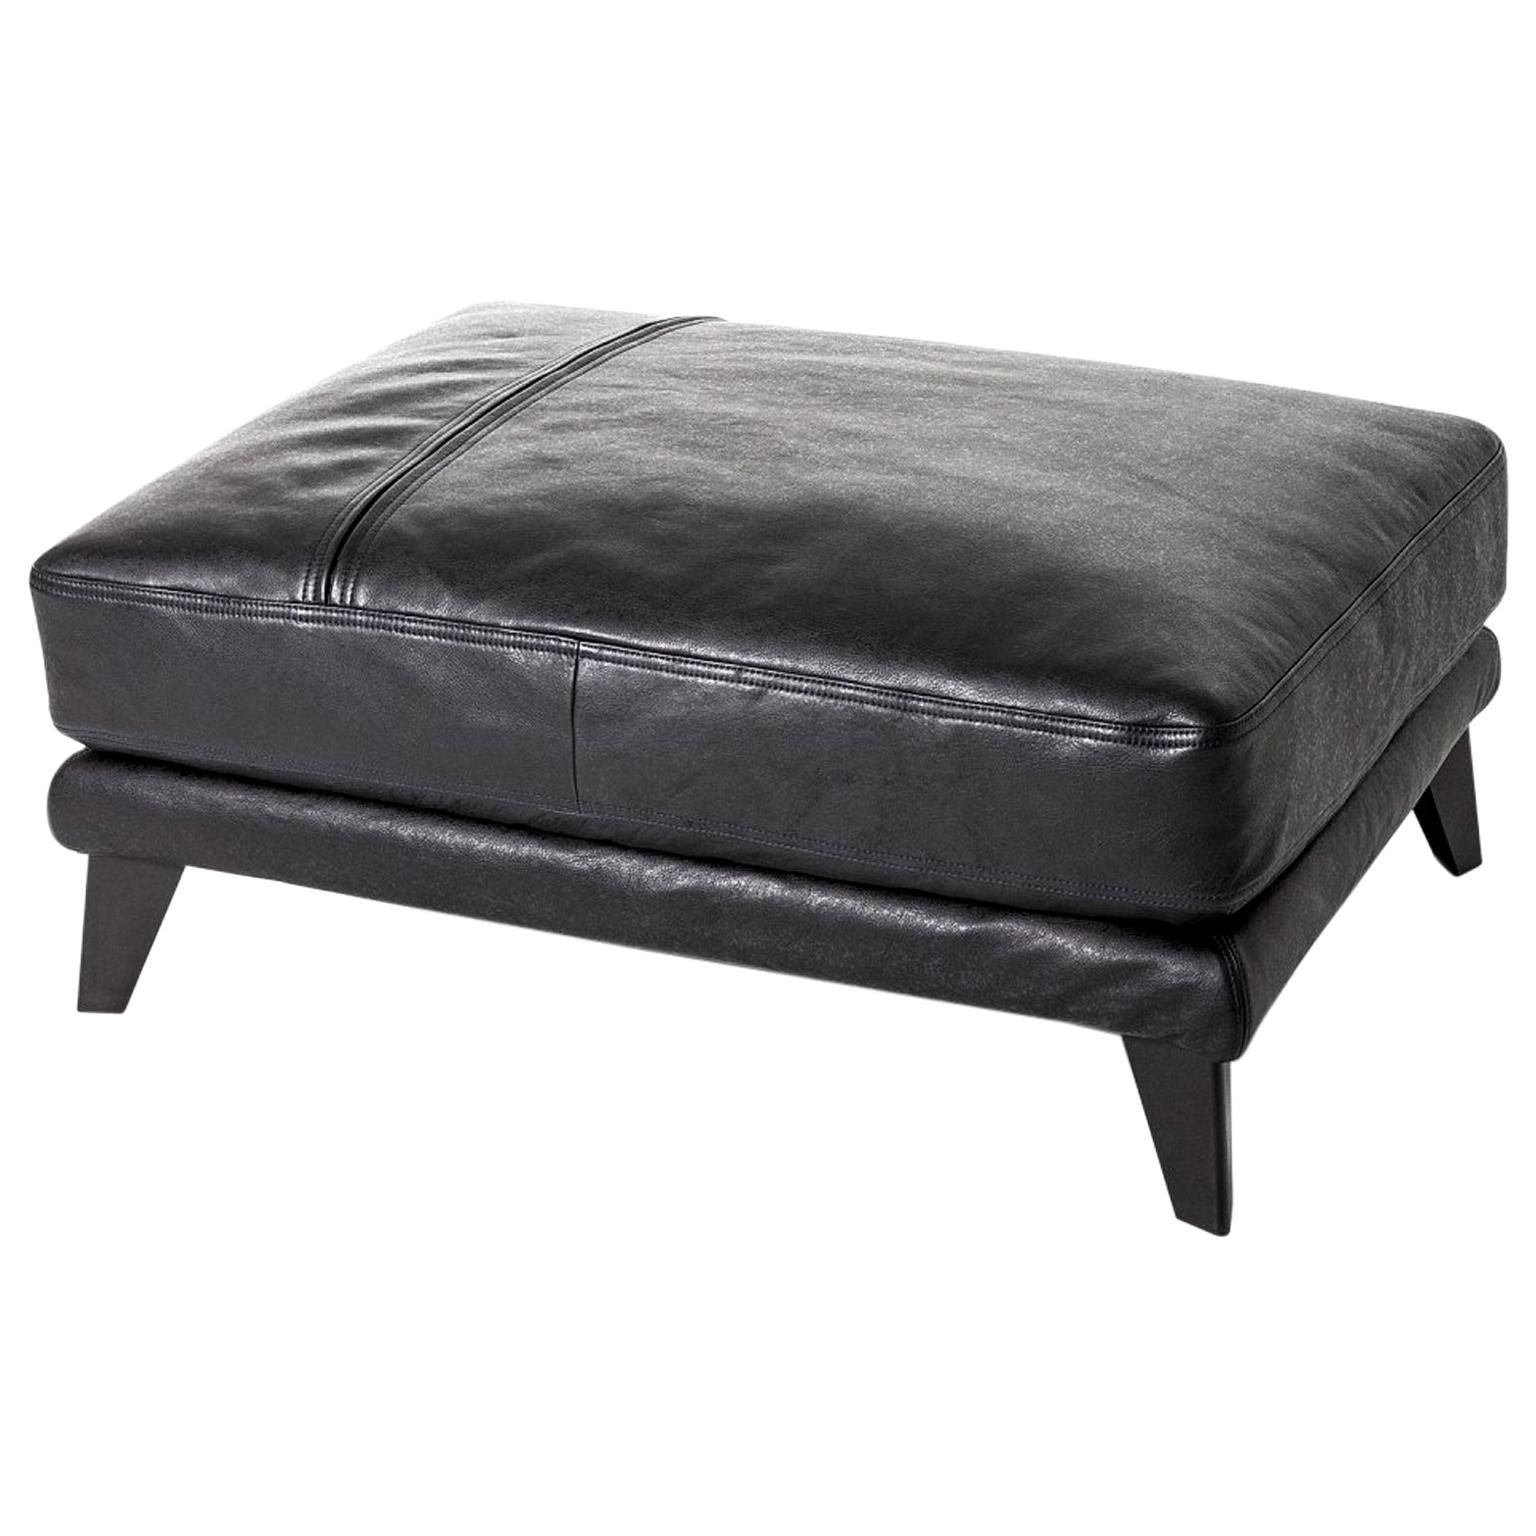 Gimme More" Leather Covered Ottoman With Fiber Or Goosemoroso For  Diesel For Sale At 1stdibs In Black Leather Wrapped Ottomans (View 15 of 15)